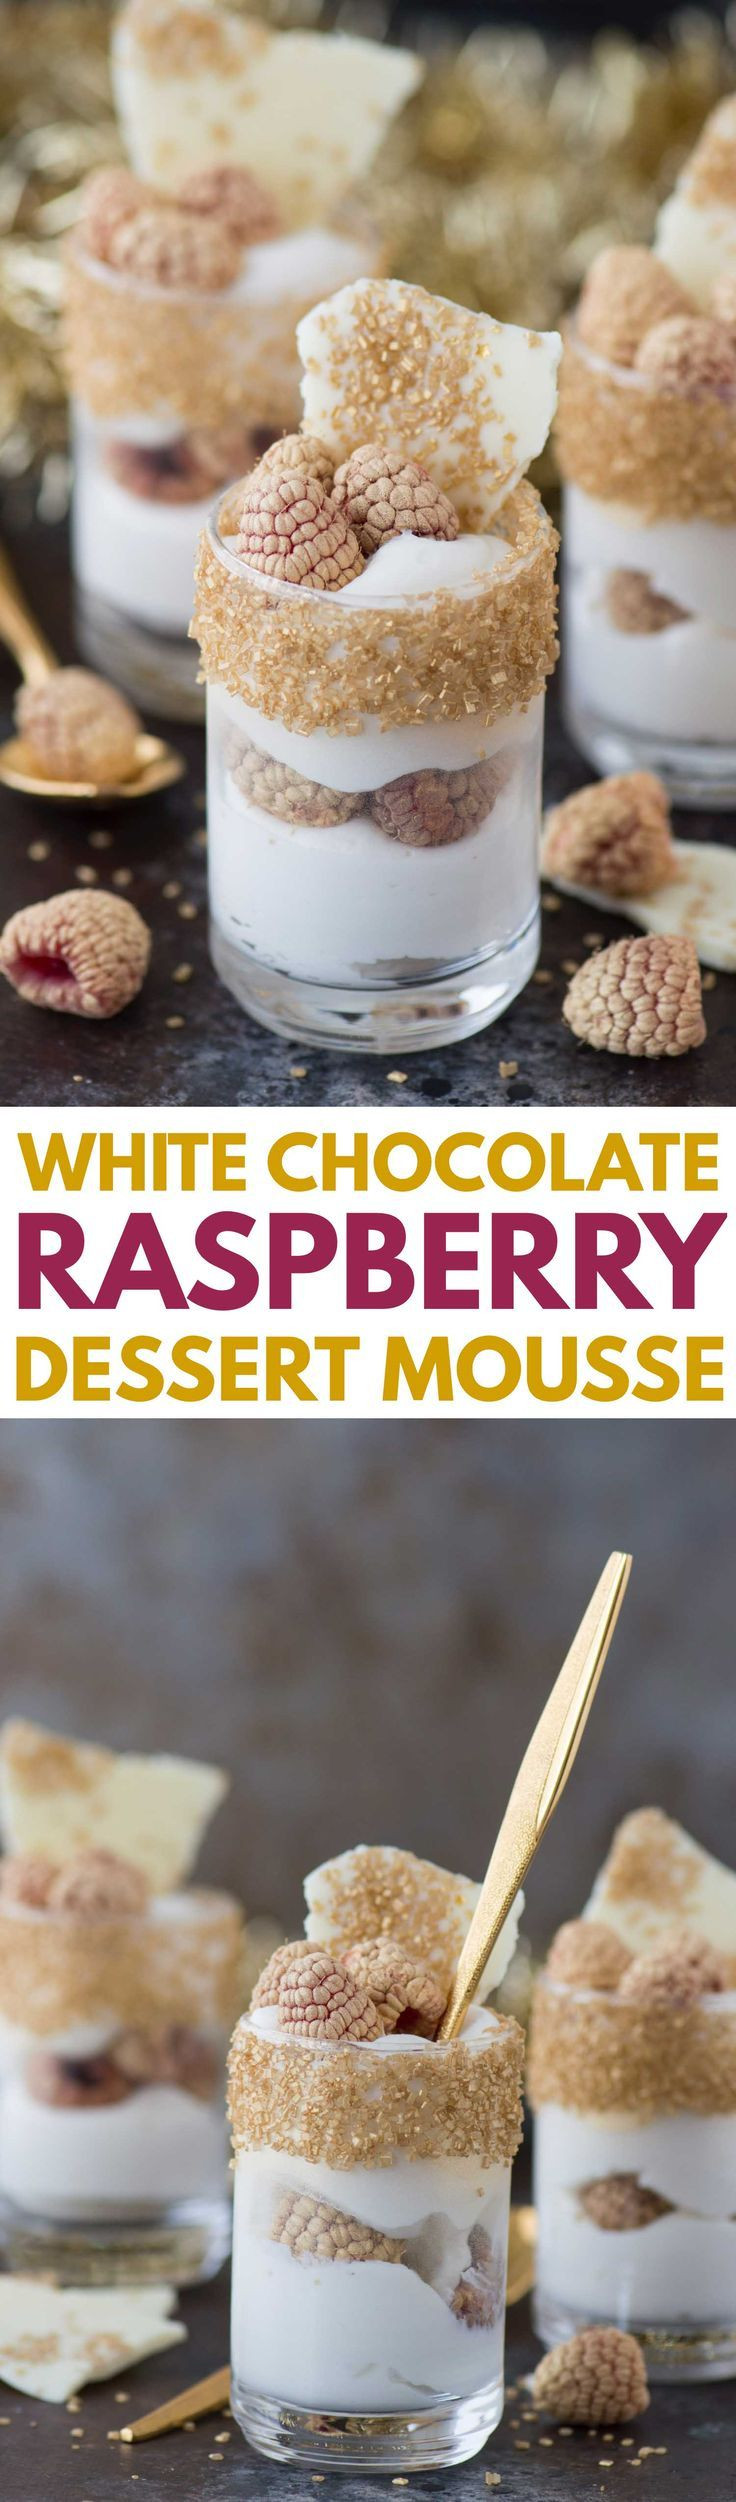 Easy New Year'S Eve Desserts
 This easy white chocolate raspberry dessert mousse is the